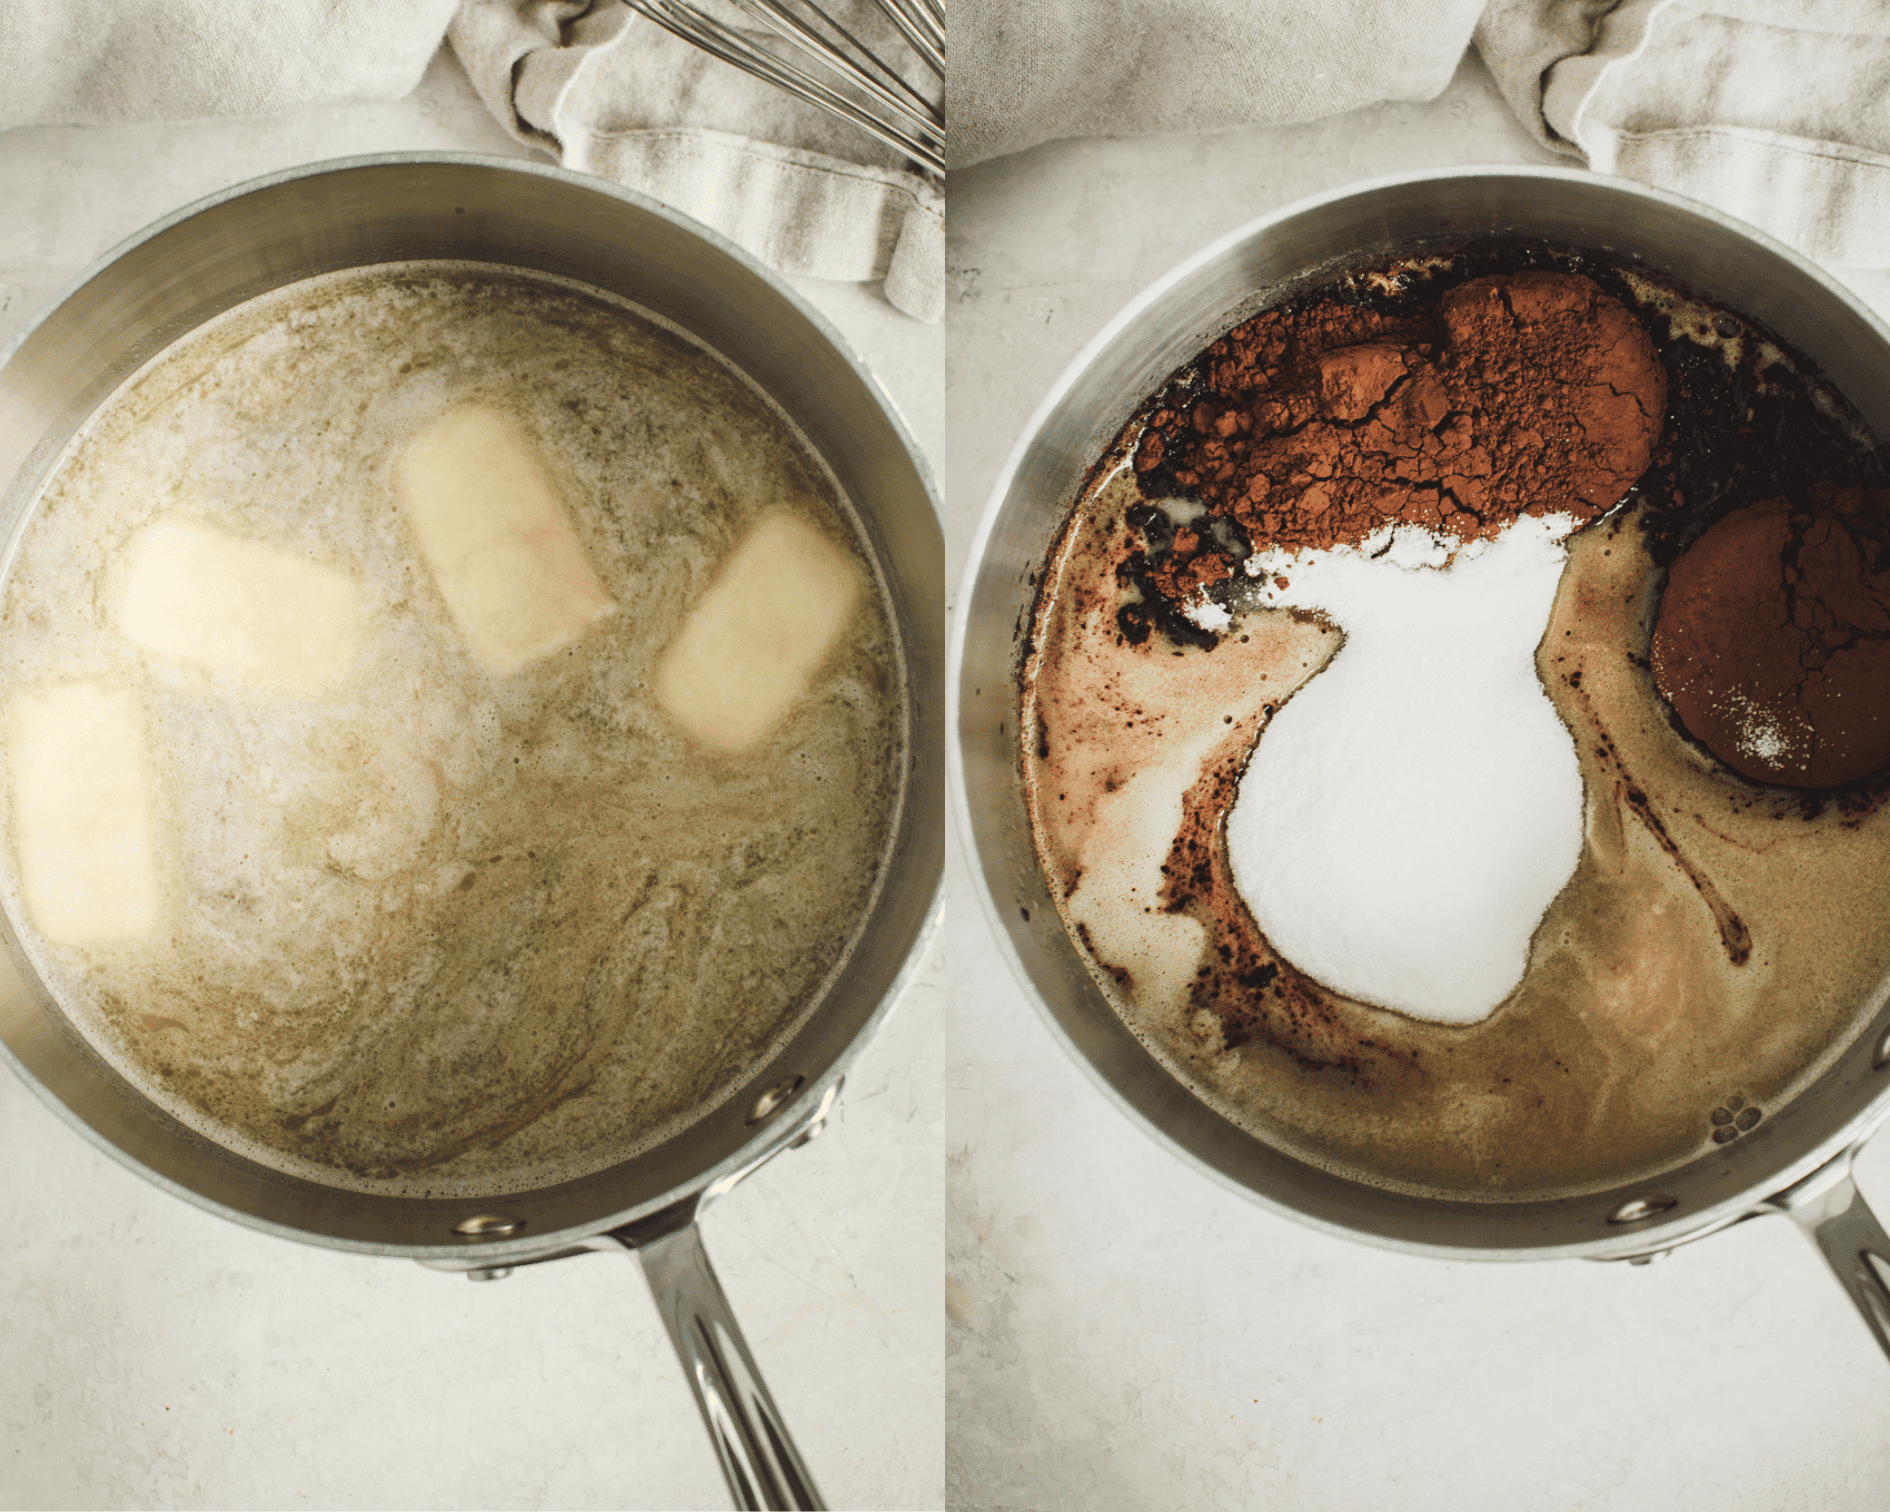 Melting butter and Guinness in a pot on left and adding cocoa and sugar to the pot on the left.